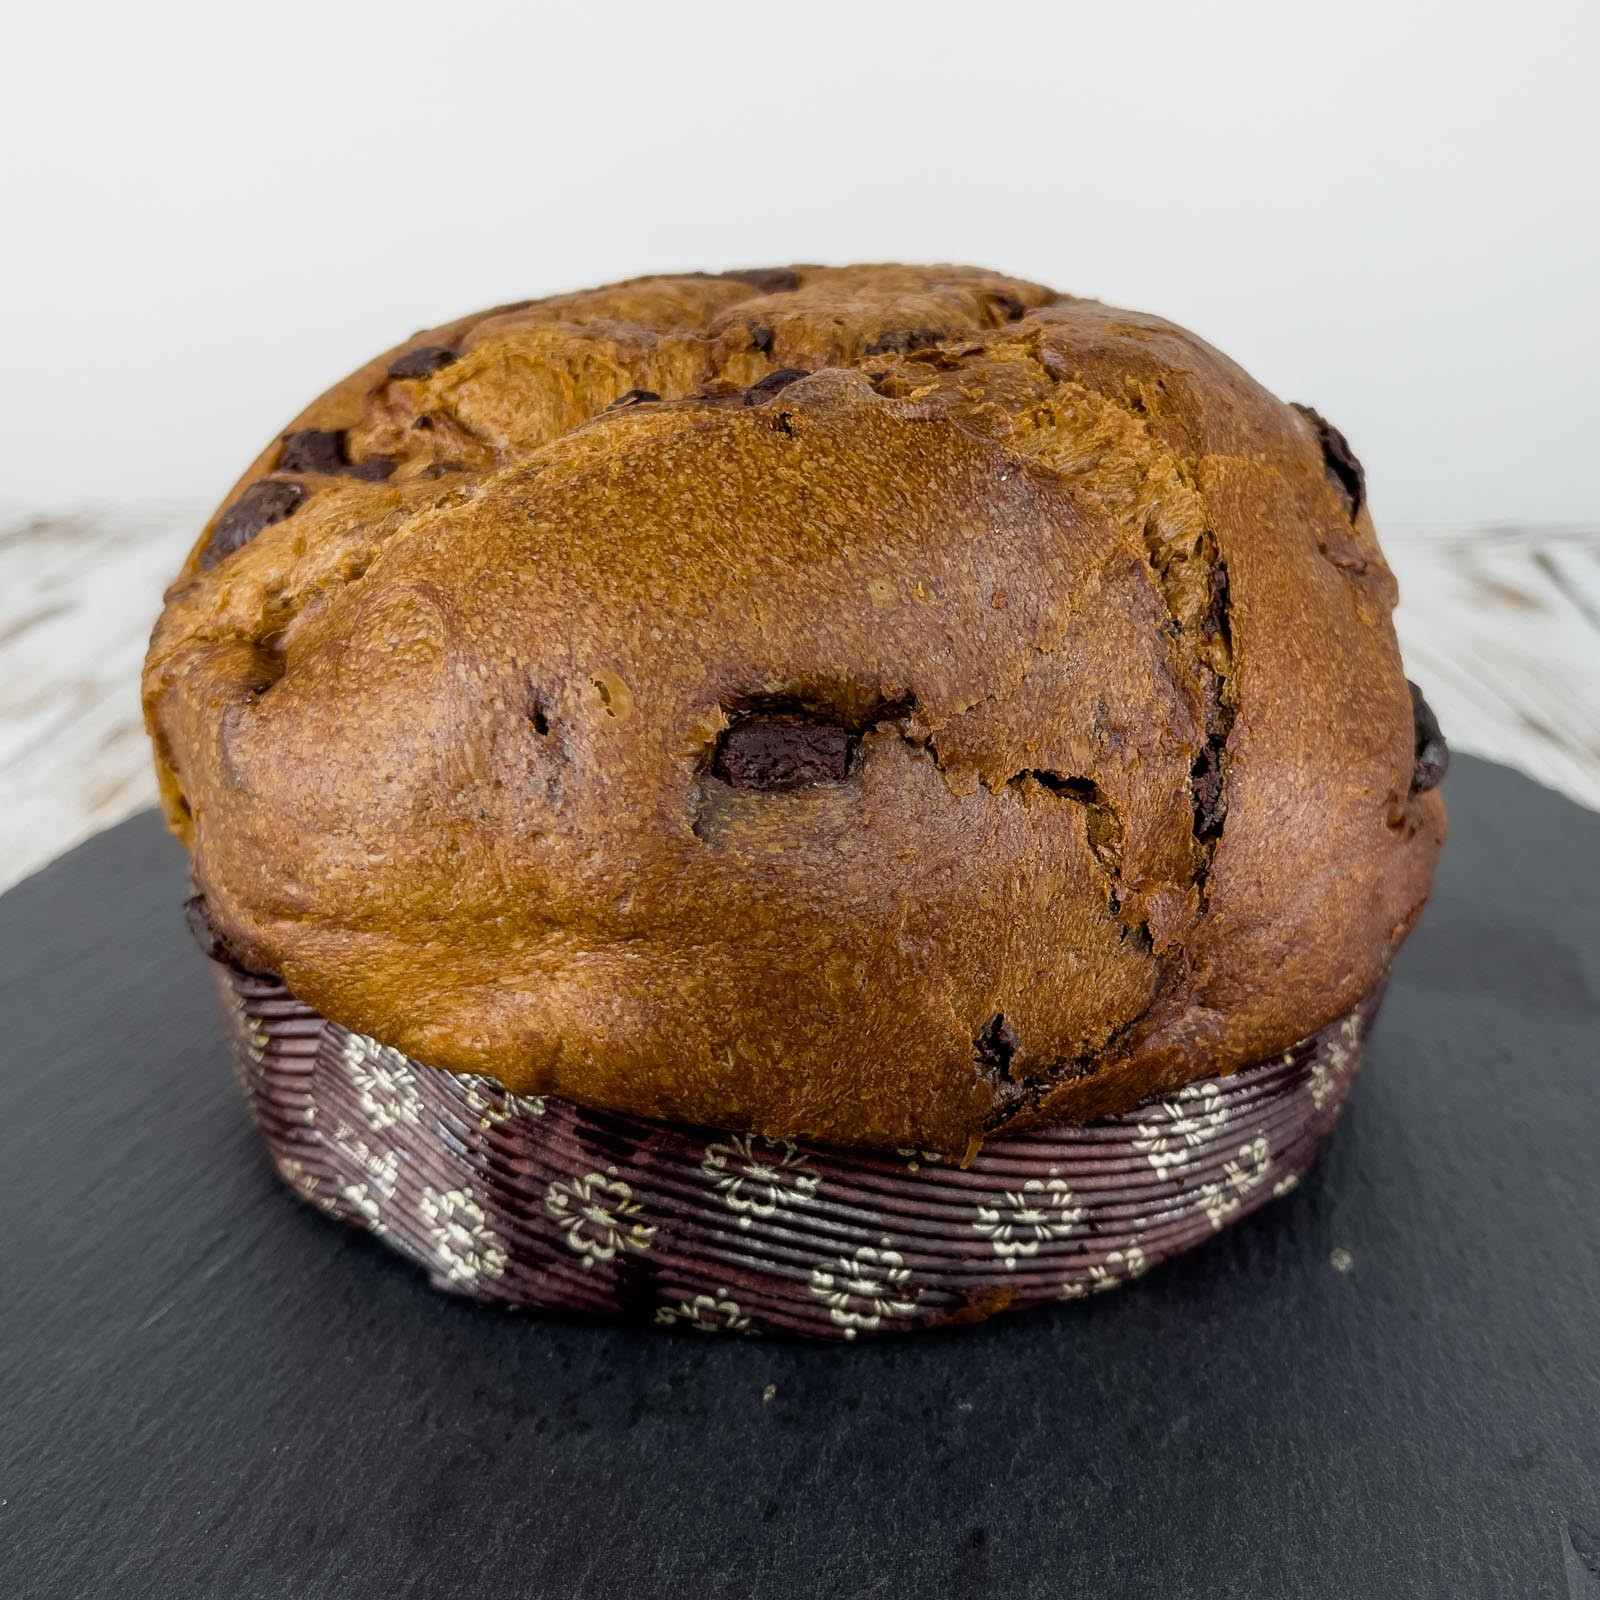 Rum “Panzuppo” is a Tuscan confectionery product. This dessert is made with a dough similar to that of panettone but with a rum distillate inside, which together with dark chocolate distinguishes it for its aroma and softness. Similarly to the classic “Panzuppo”, an essential feature of this product is the long leavening.